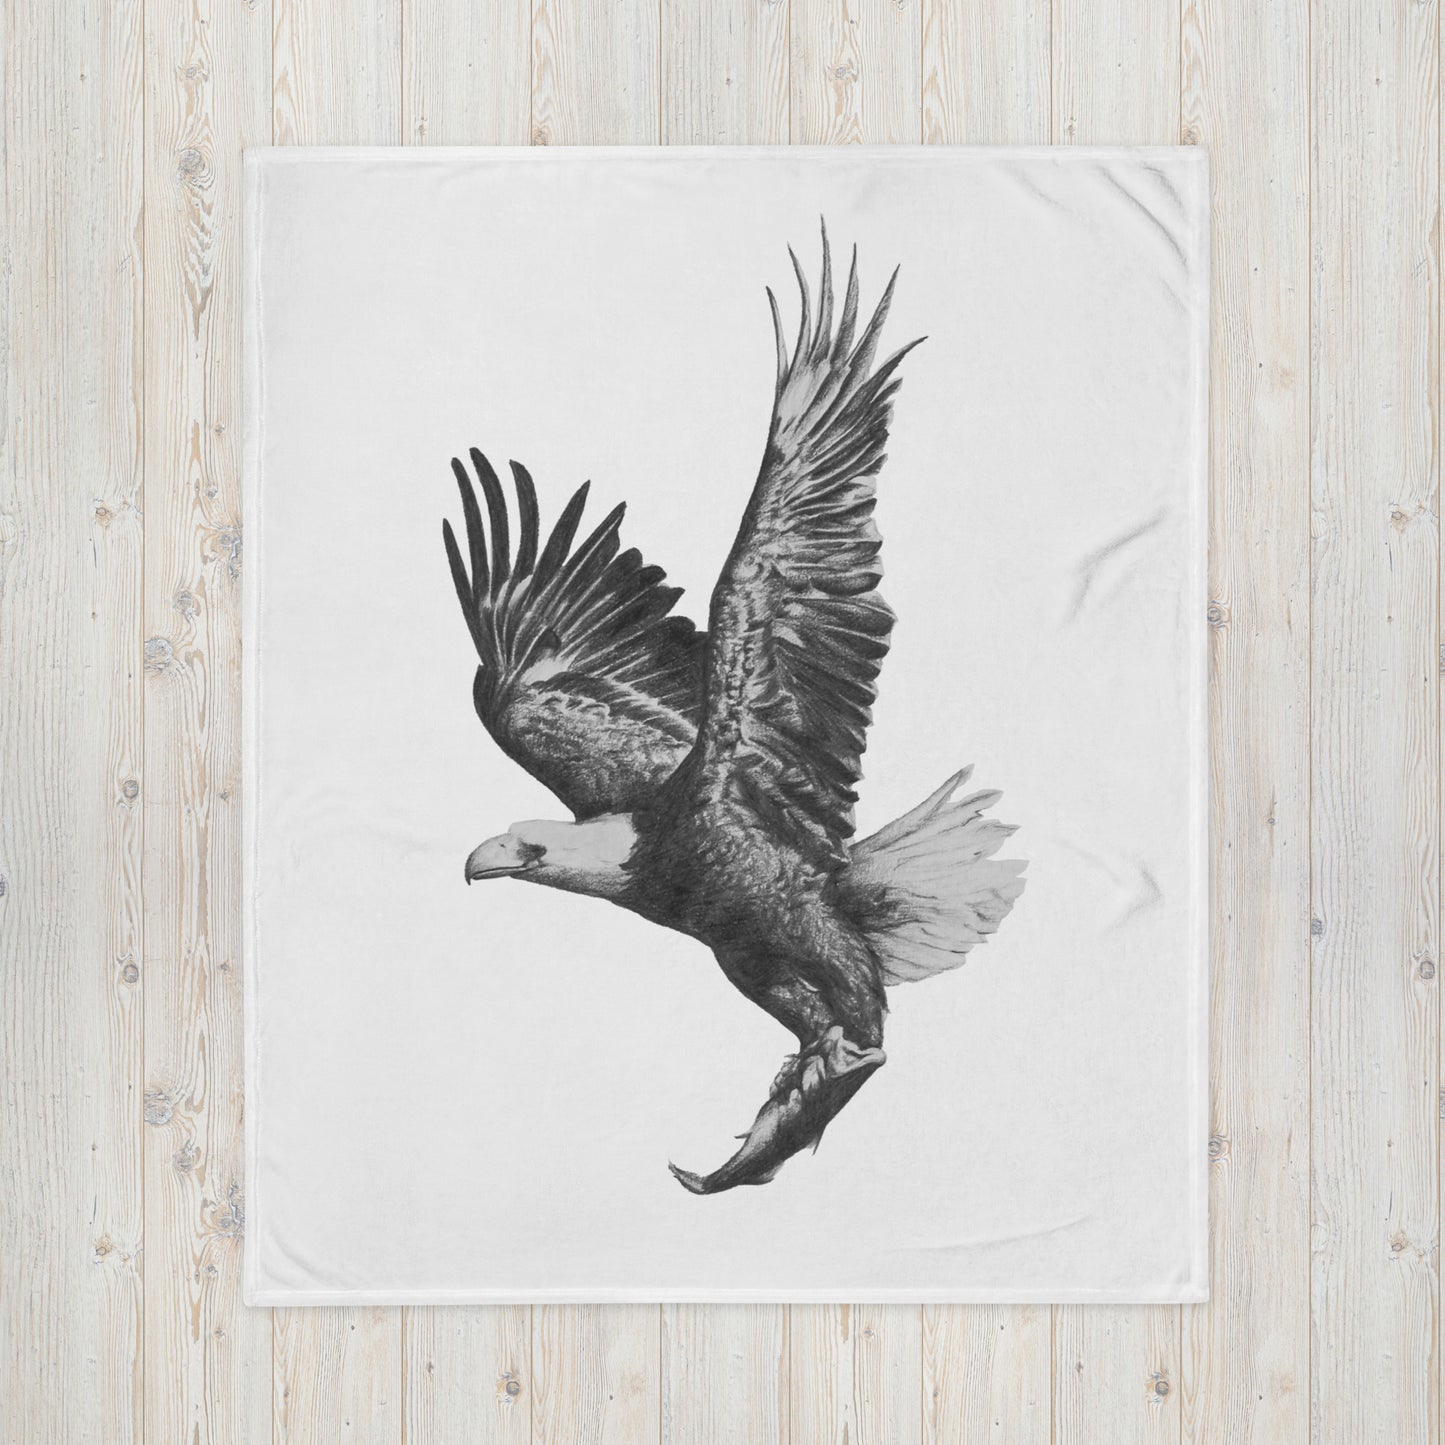 These "Eagle Canvas Wall Hangings(W)" are from a drawing of mine created with a graphite pencil. It has been digitally optimized and transferred to a 100% Polyester throw blanket.